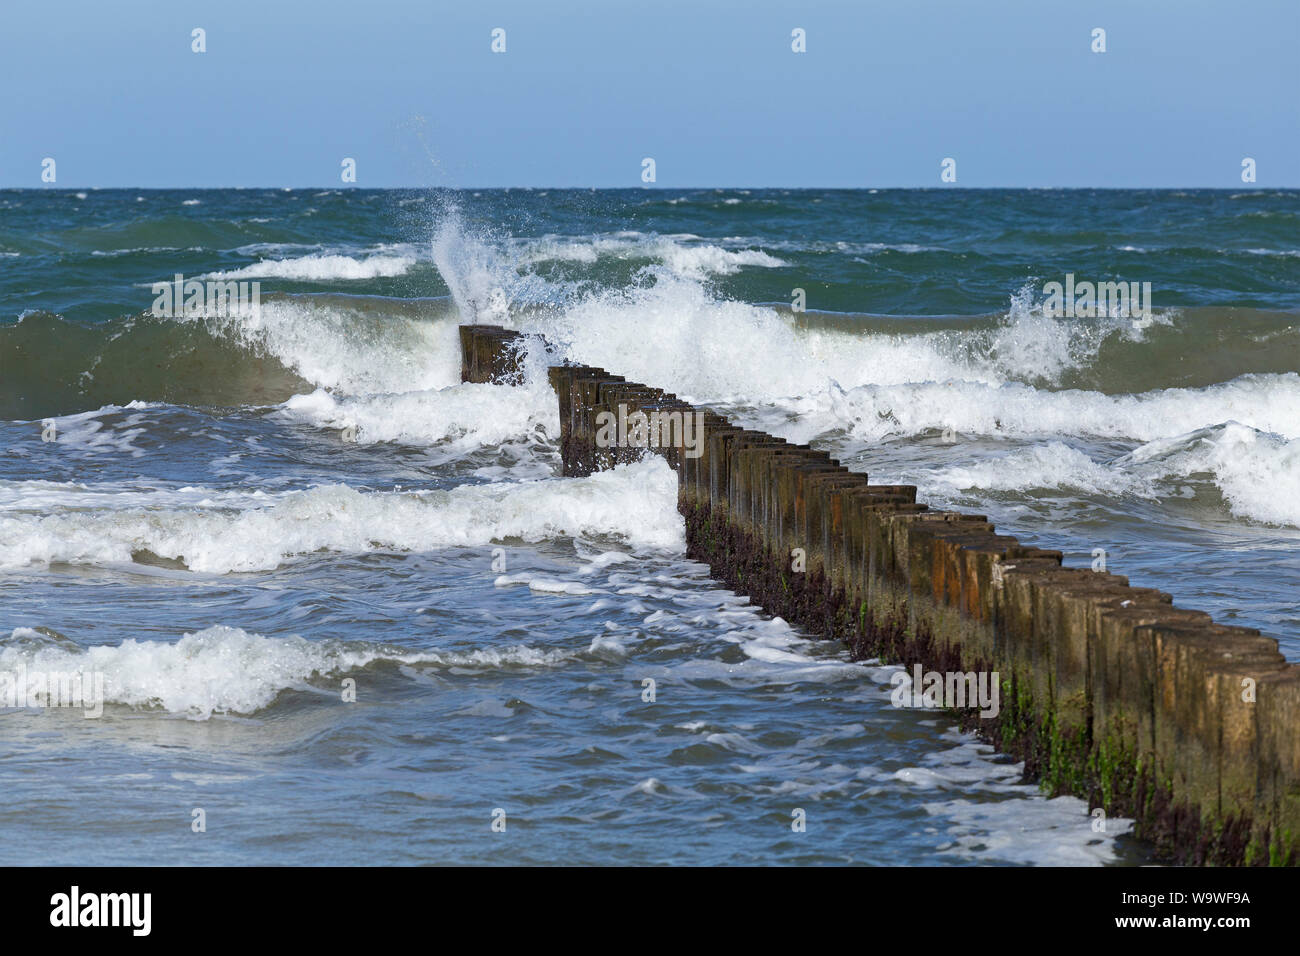 wind waves at the beach of Wustrow, Fischland, Mecklenburg-West Pomerania, Germany Stock Photo